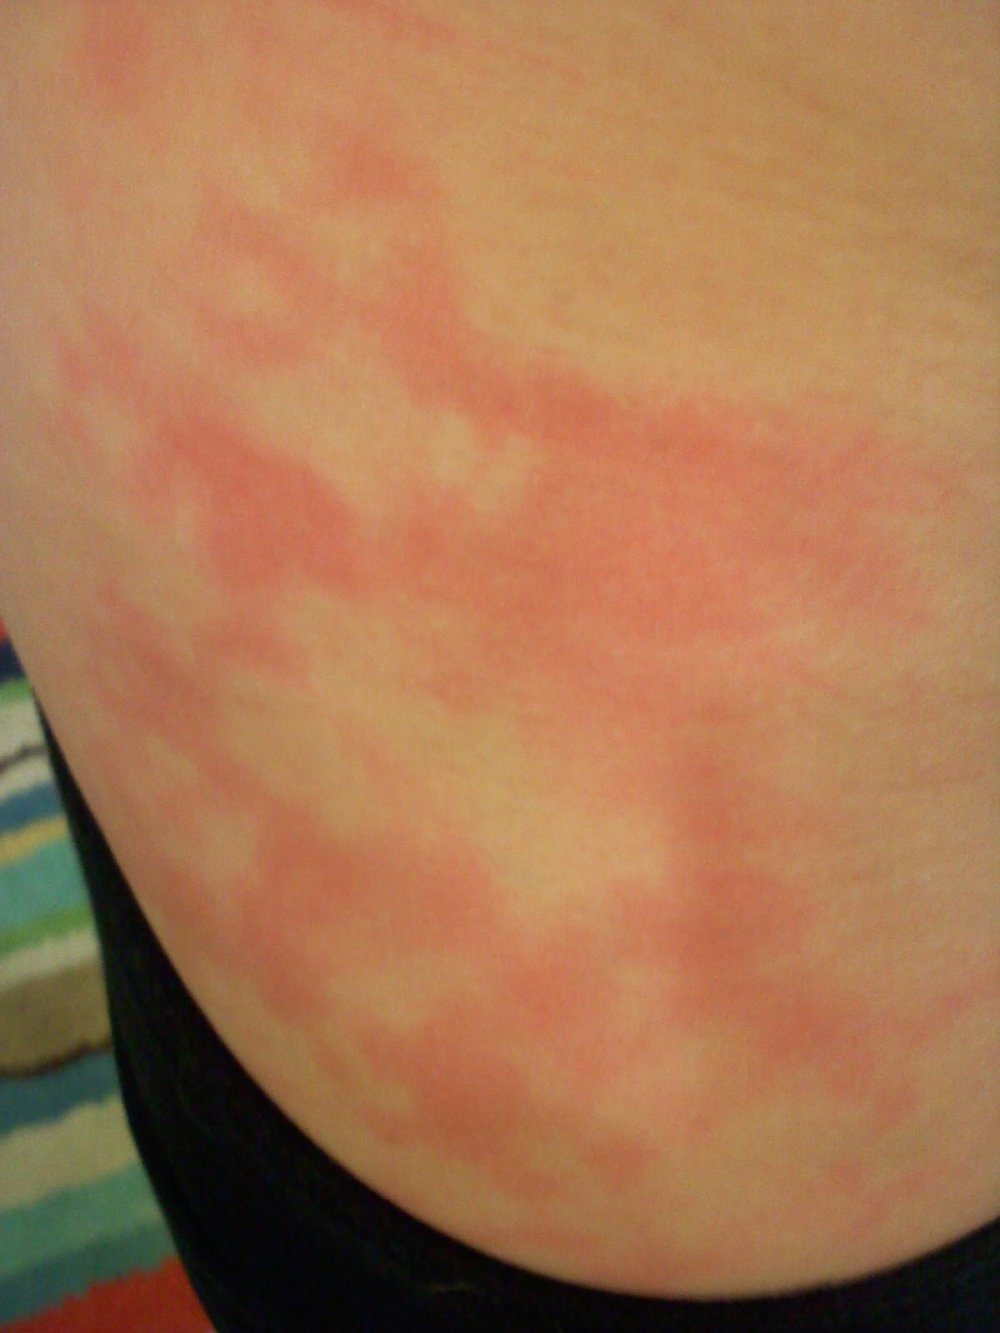 red blotchy rash - pictures, photos